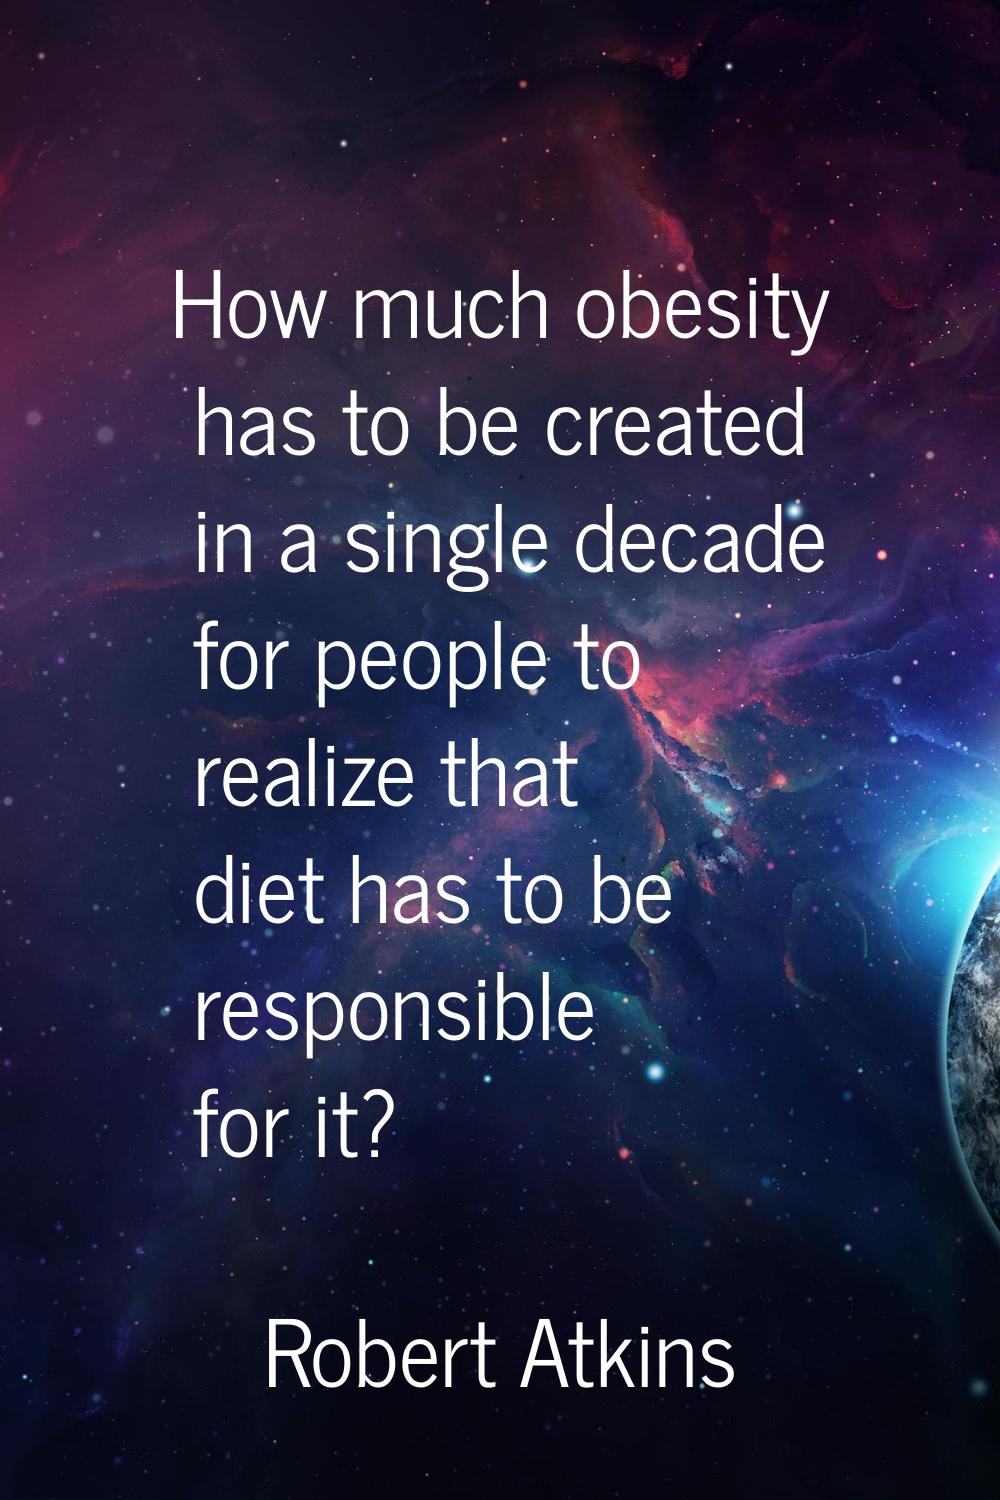 How much obesity has to be created in a single decade for people to realize that diet has to be res